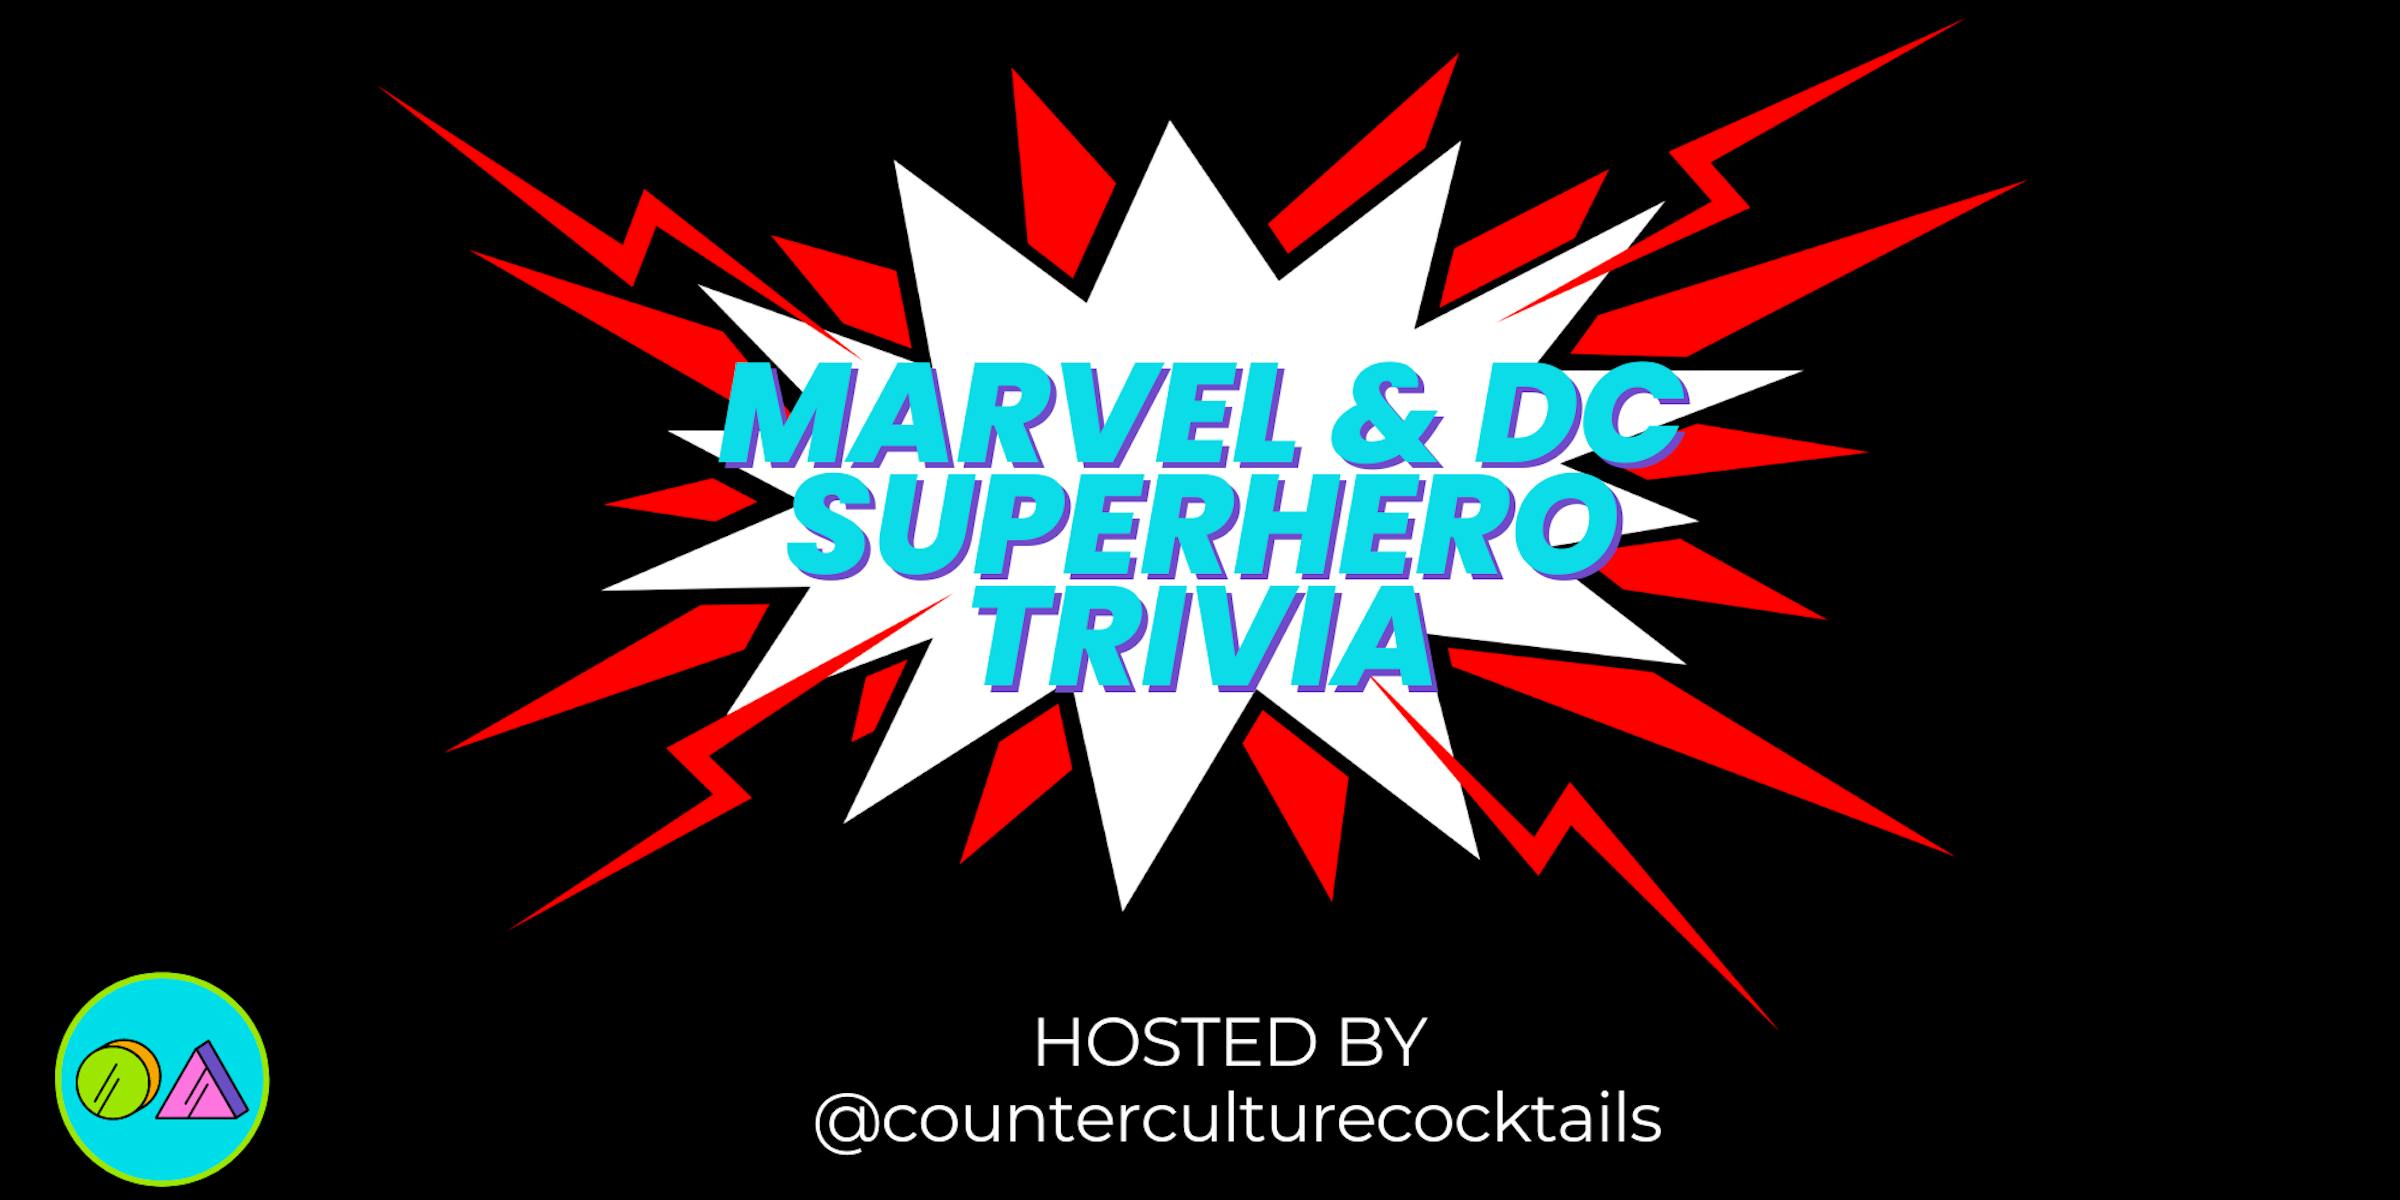 Marvel & DC Superhero Trivia hosted by Counter Culture